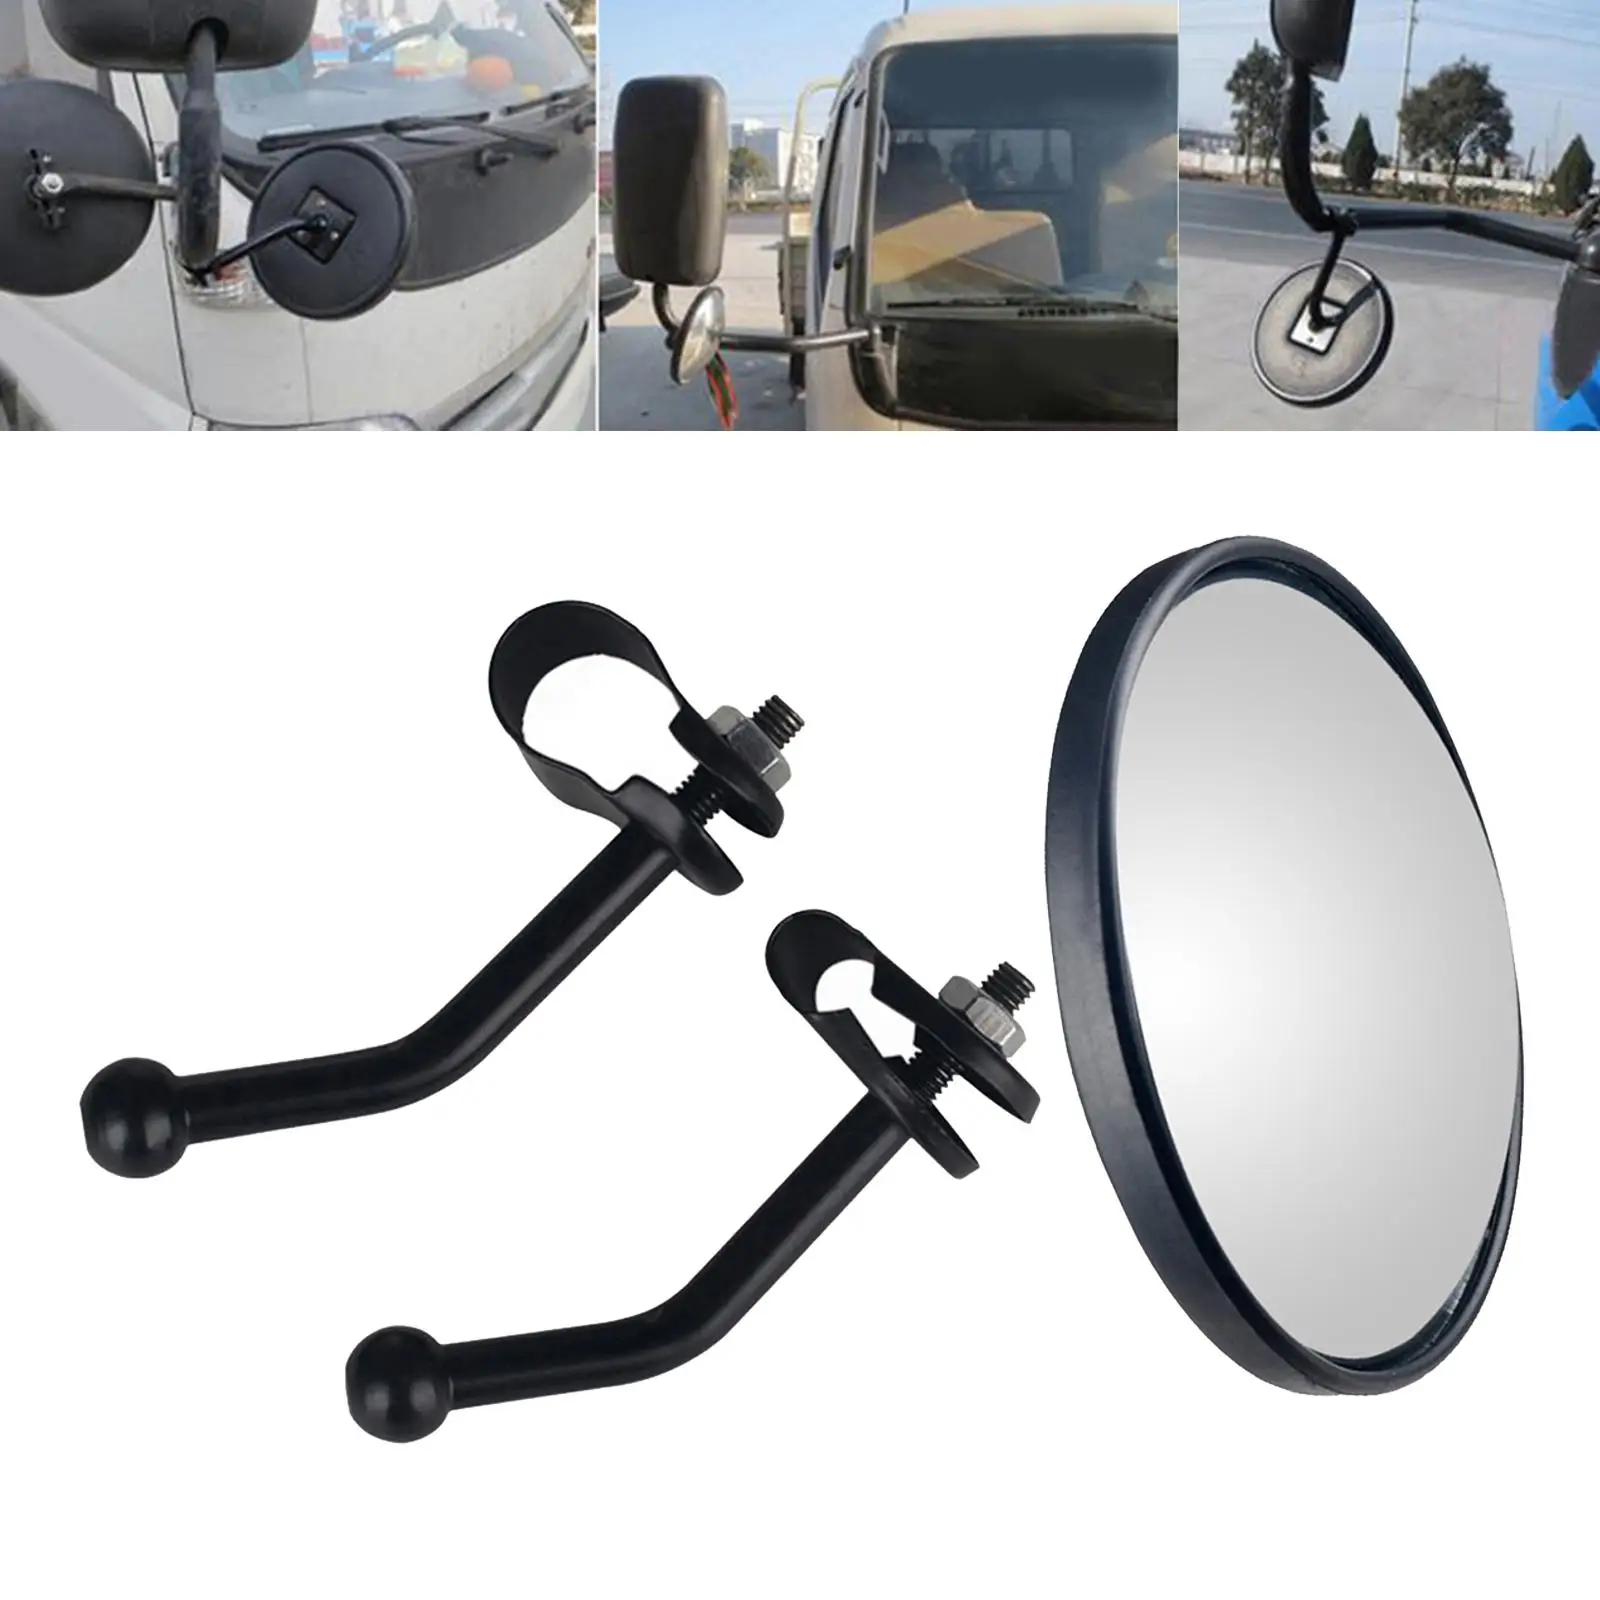 Adjustable Blind Spot Mirrors Car Auxiliary Accessories Replacement Rearview Large View Field Convex Mirror for School Bus